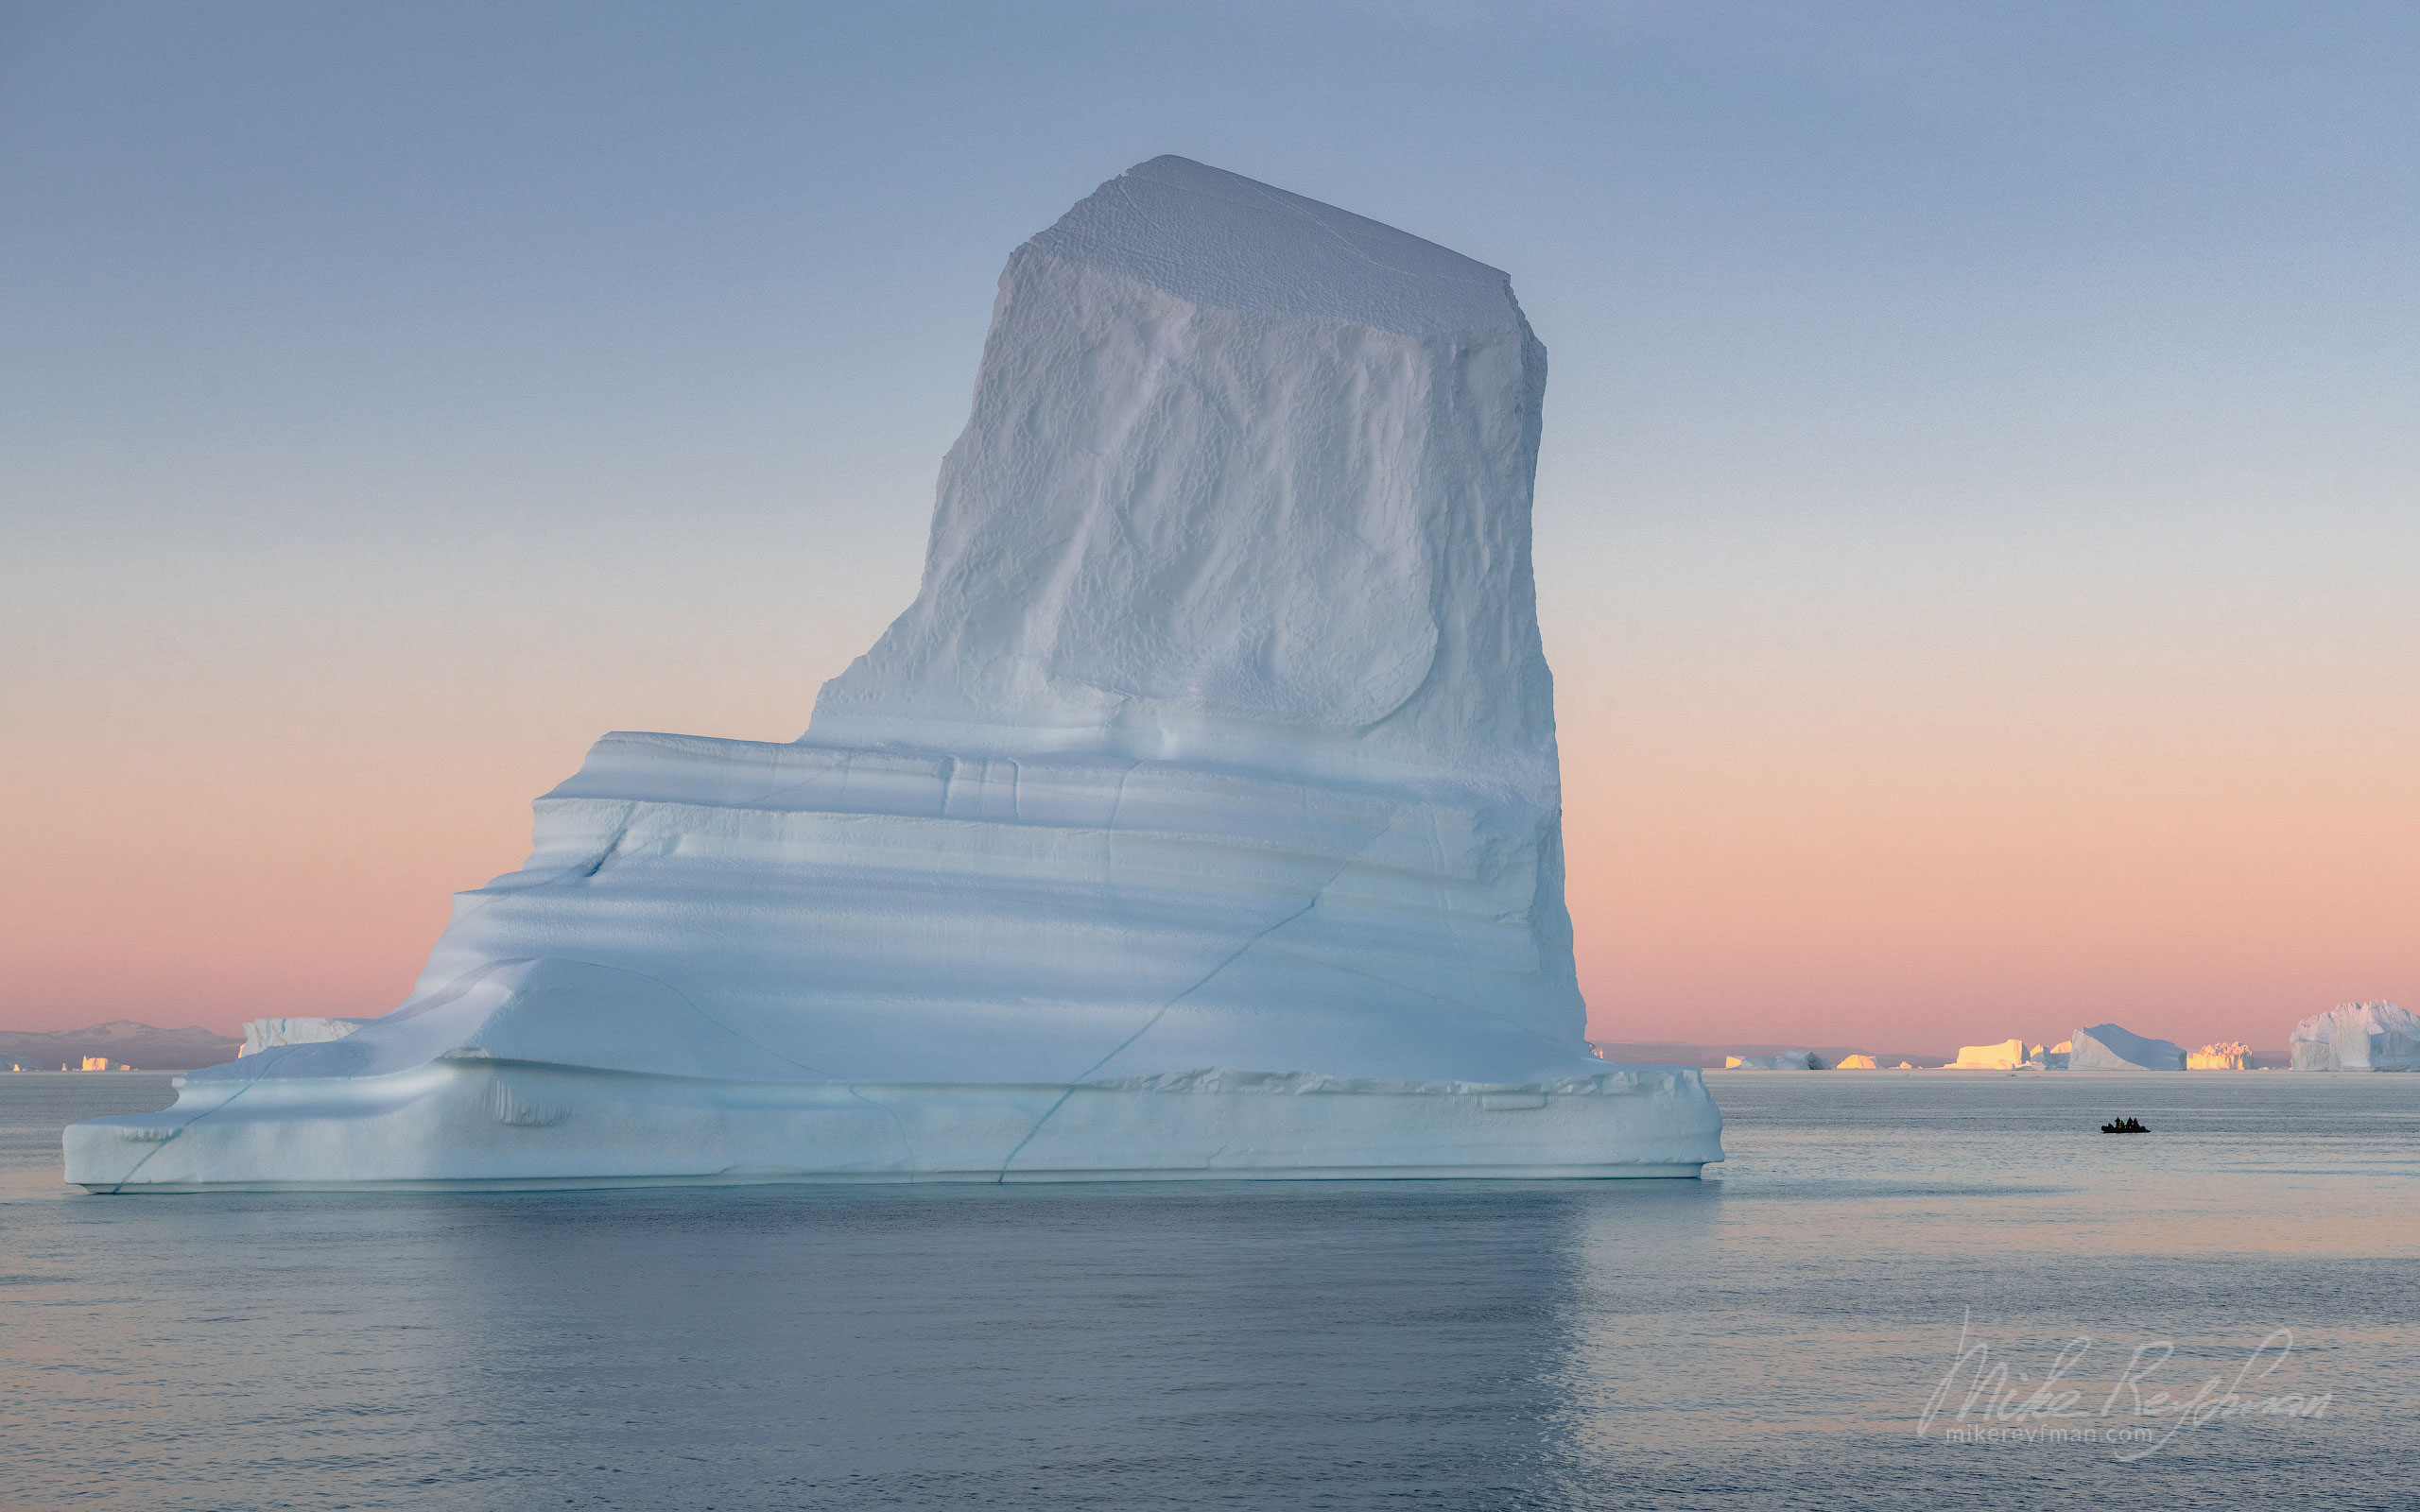 Iceberg in Scoresby Sund. Greenland. 008-GR-SC_50B6106 - The Scoresby Sund fjord system and the settlement of Ittoqqortoormiit. East Greenland. - Mike Reyfman Photography